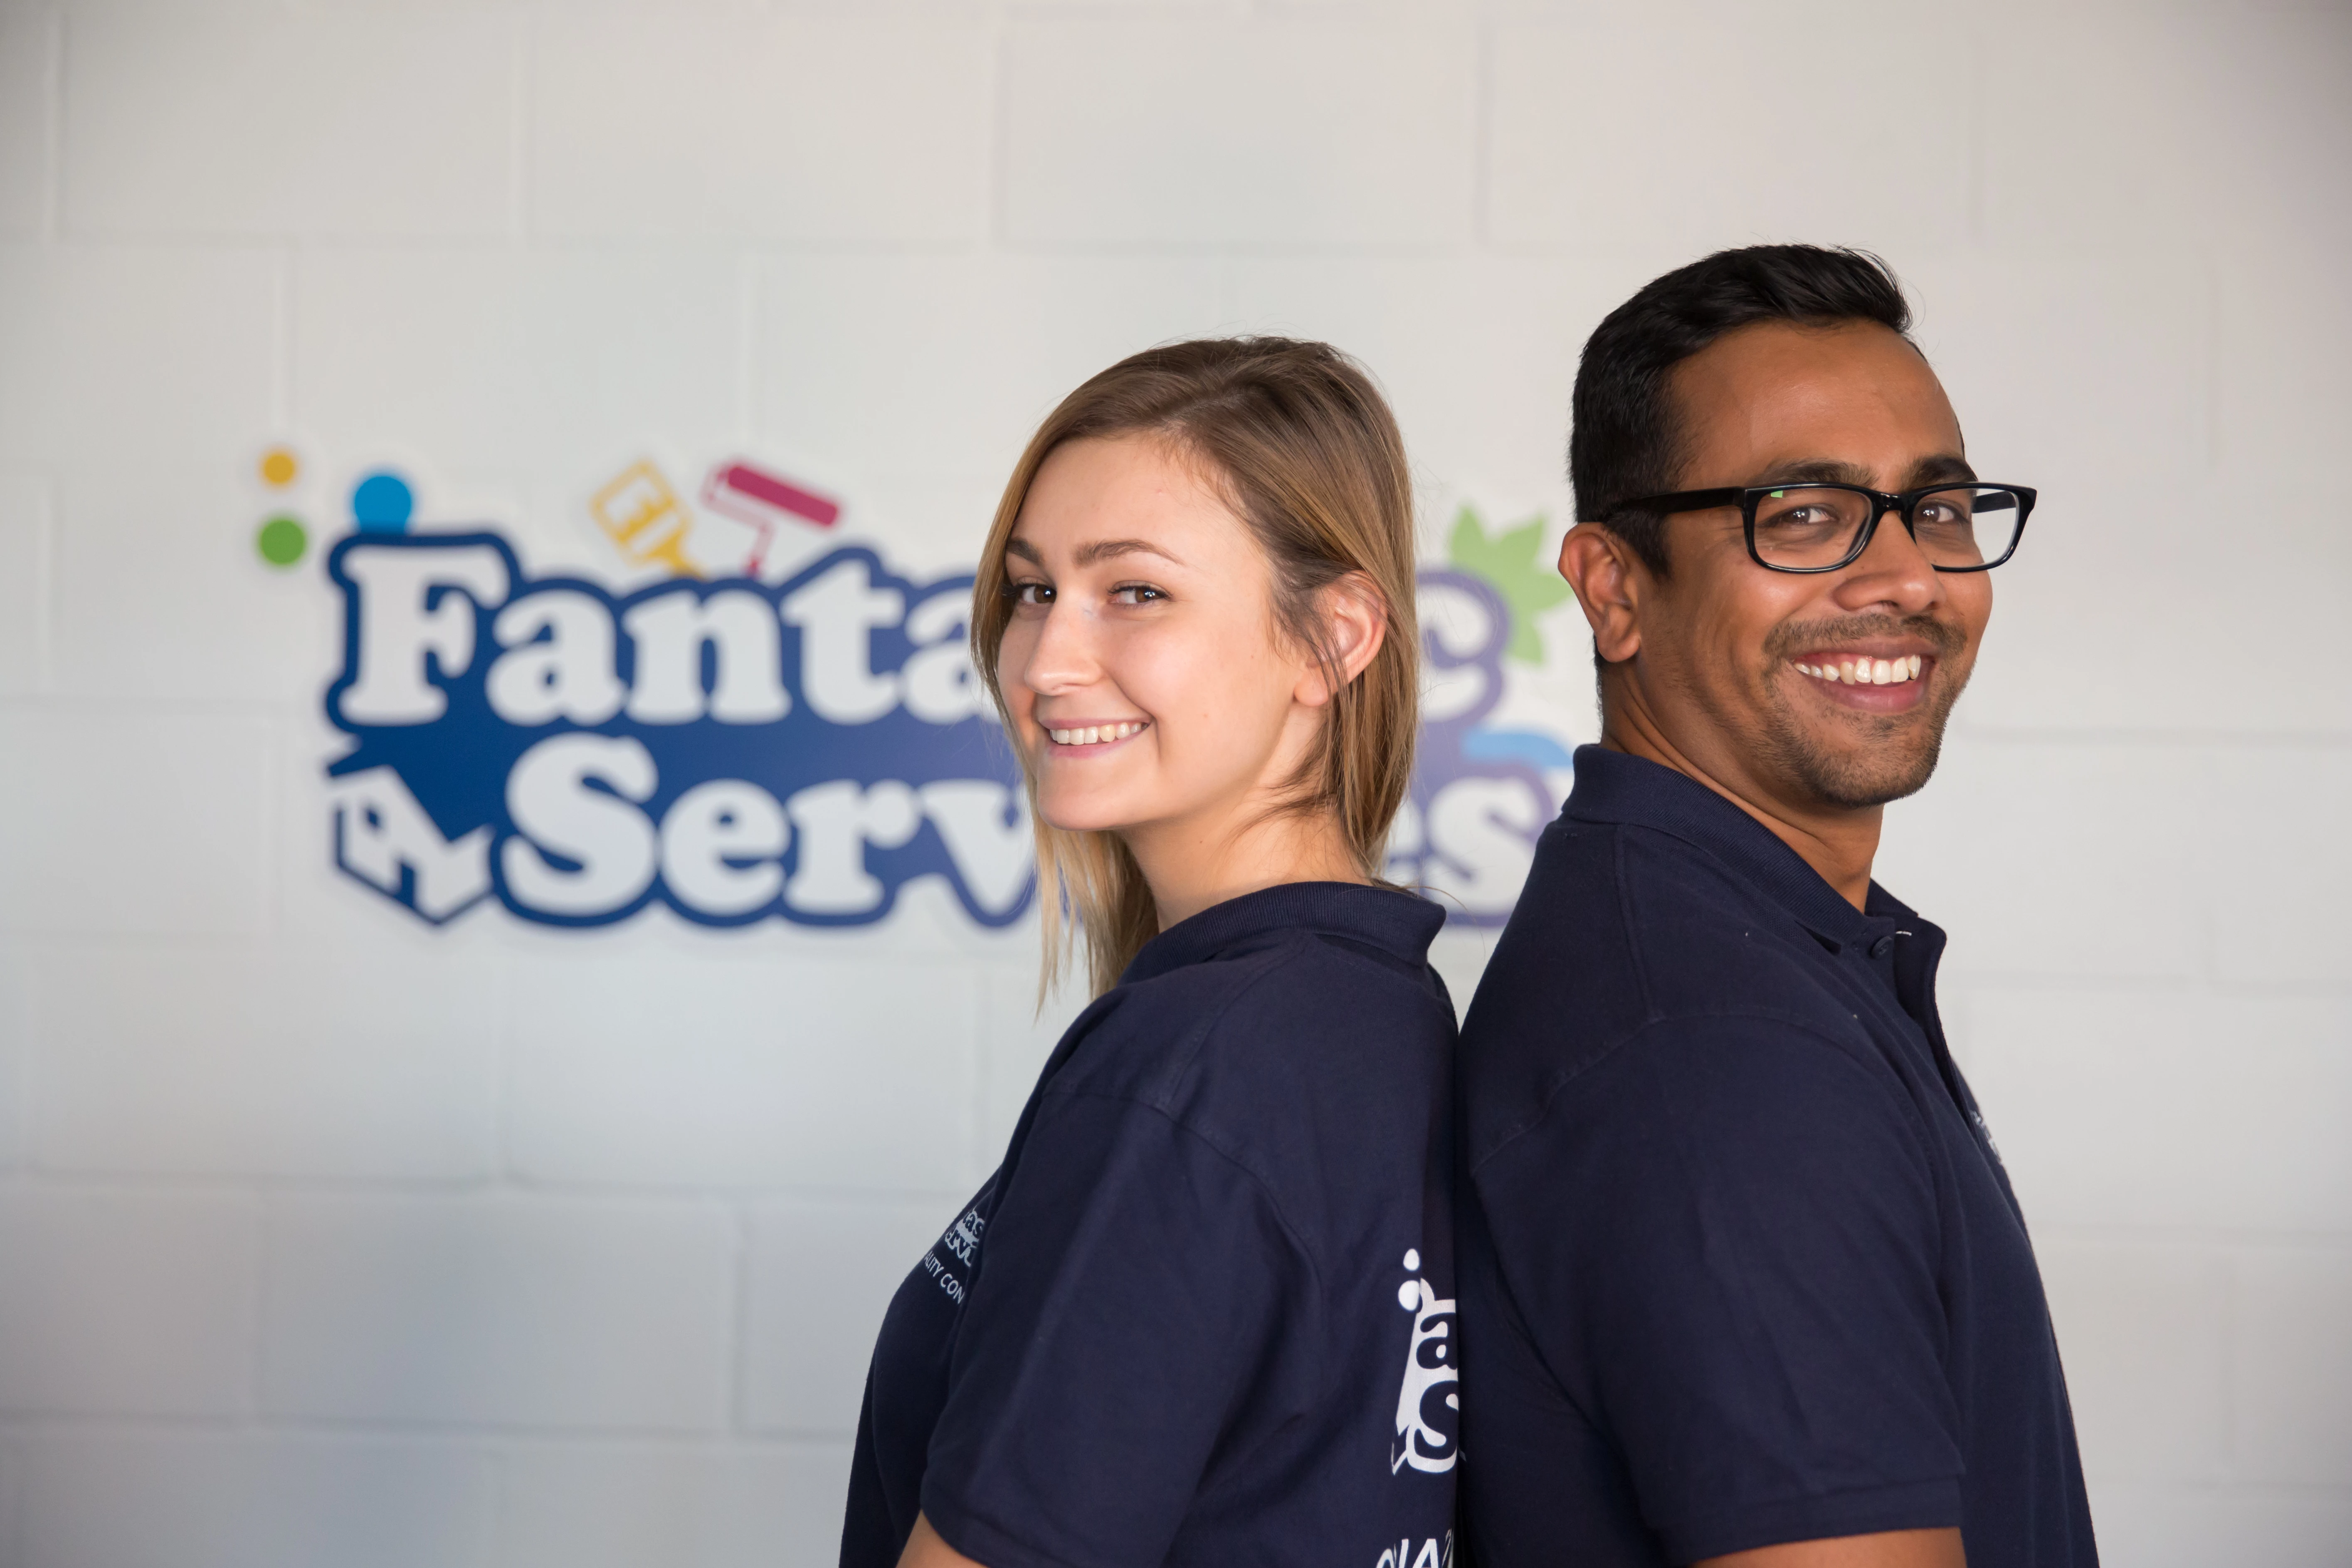 Julian and Lucy Fernando finding franchise success with Fantastic Services